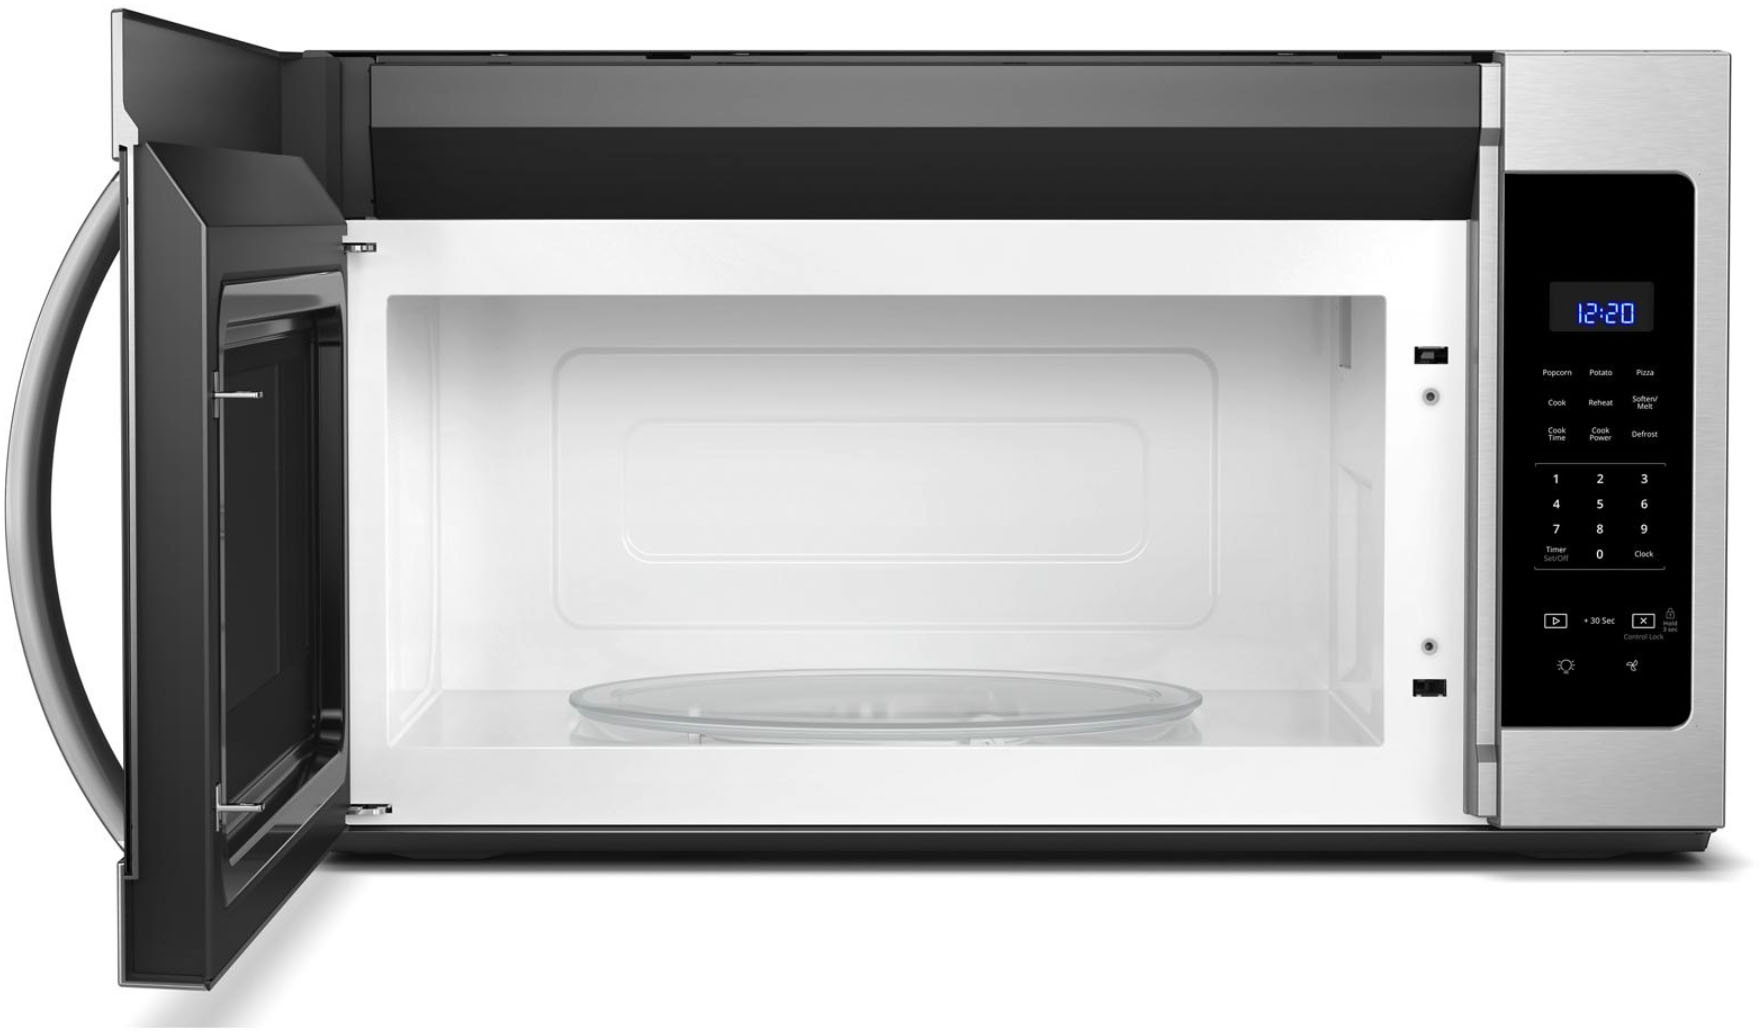 Angle View: Whirlpool - 1.7 Cu. Ft. Over-the-Range Microwave - Stainless Steel